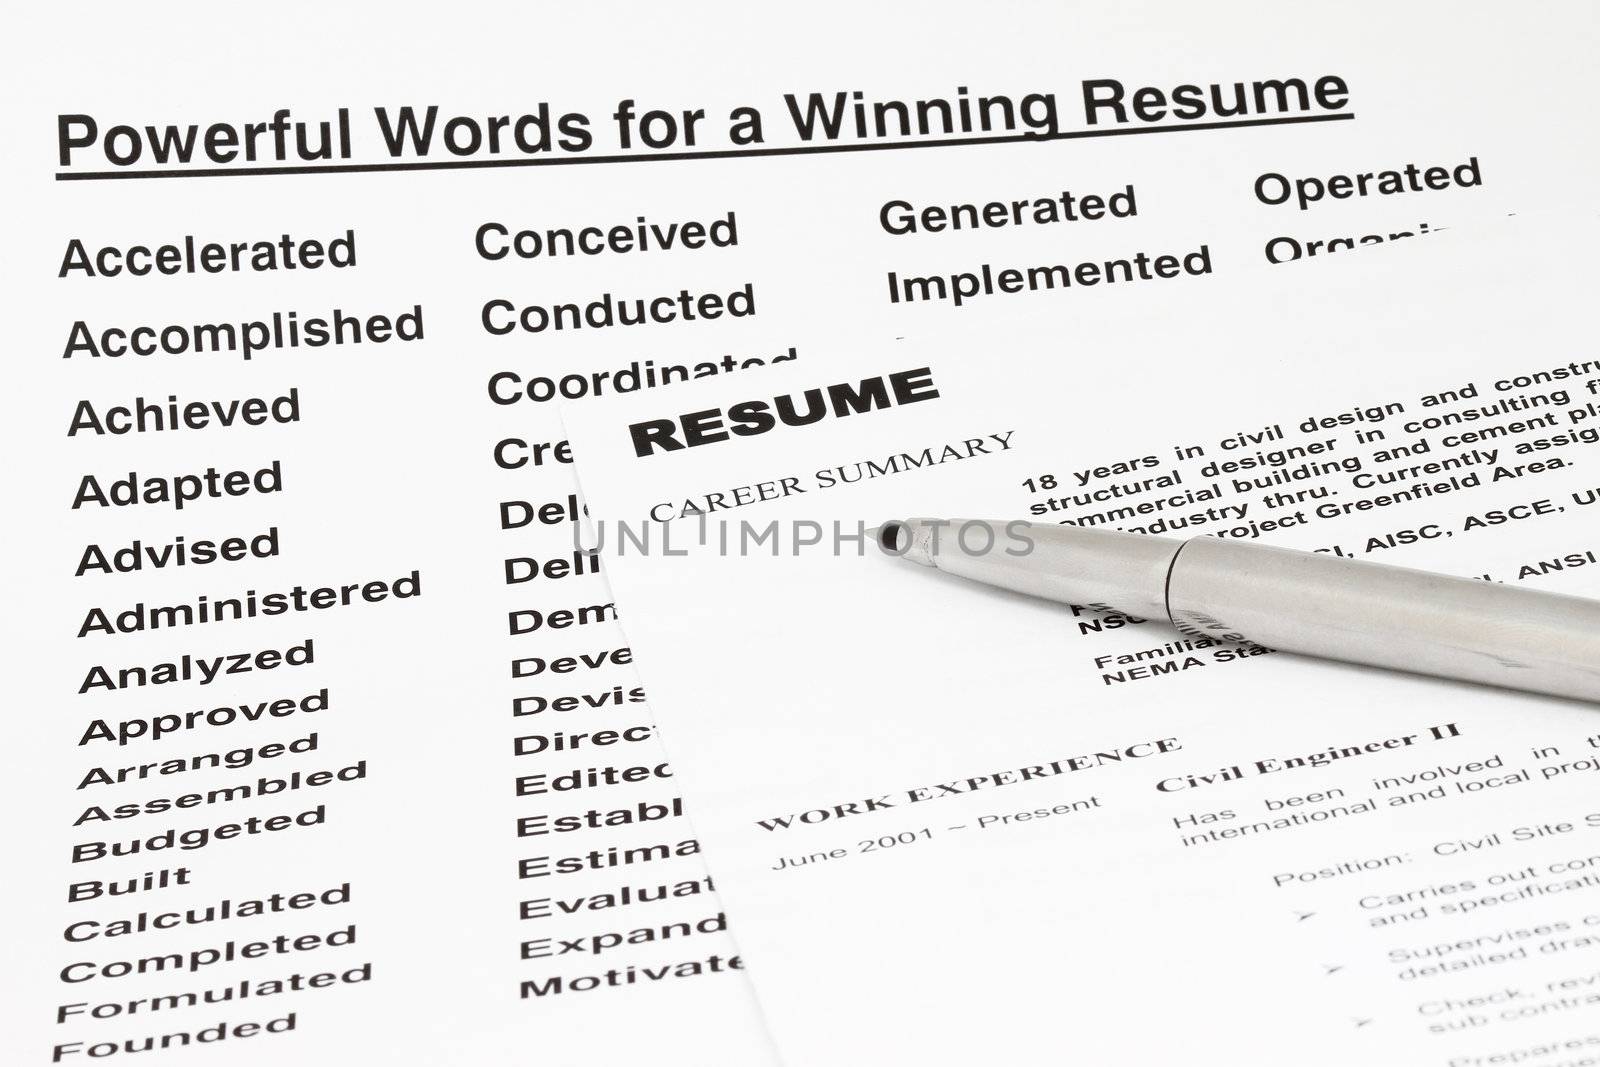 Powerful words for winning a resume- manu uses for employment sector.